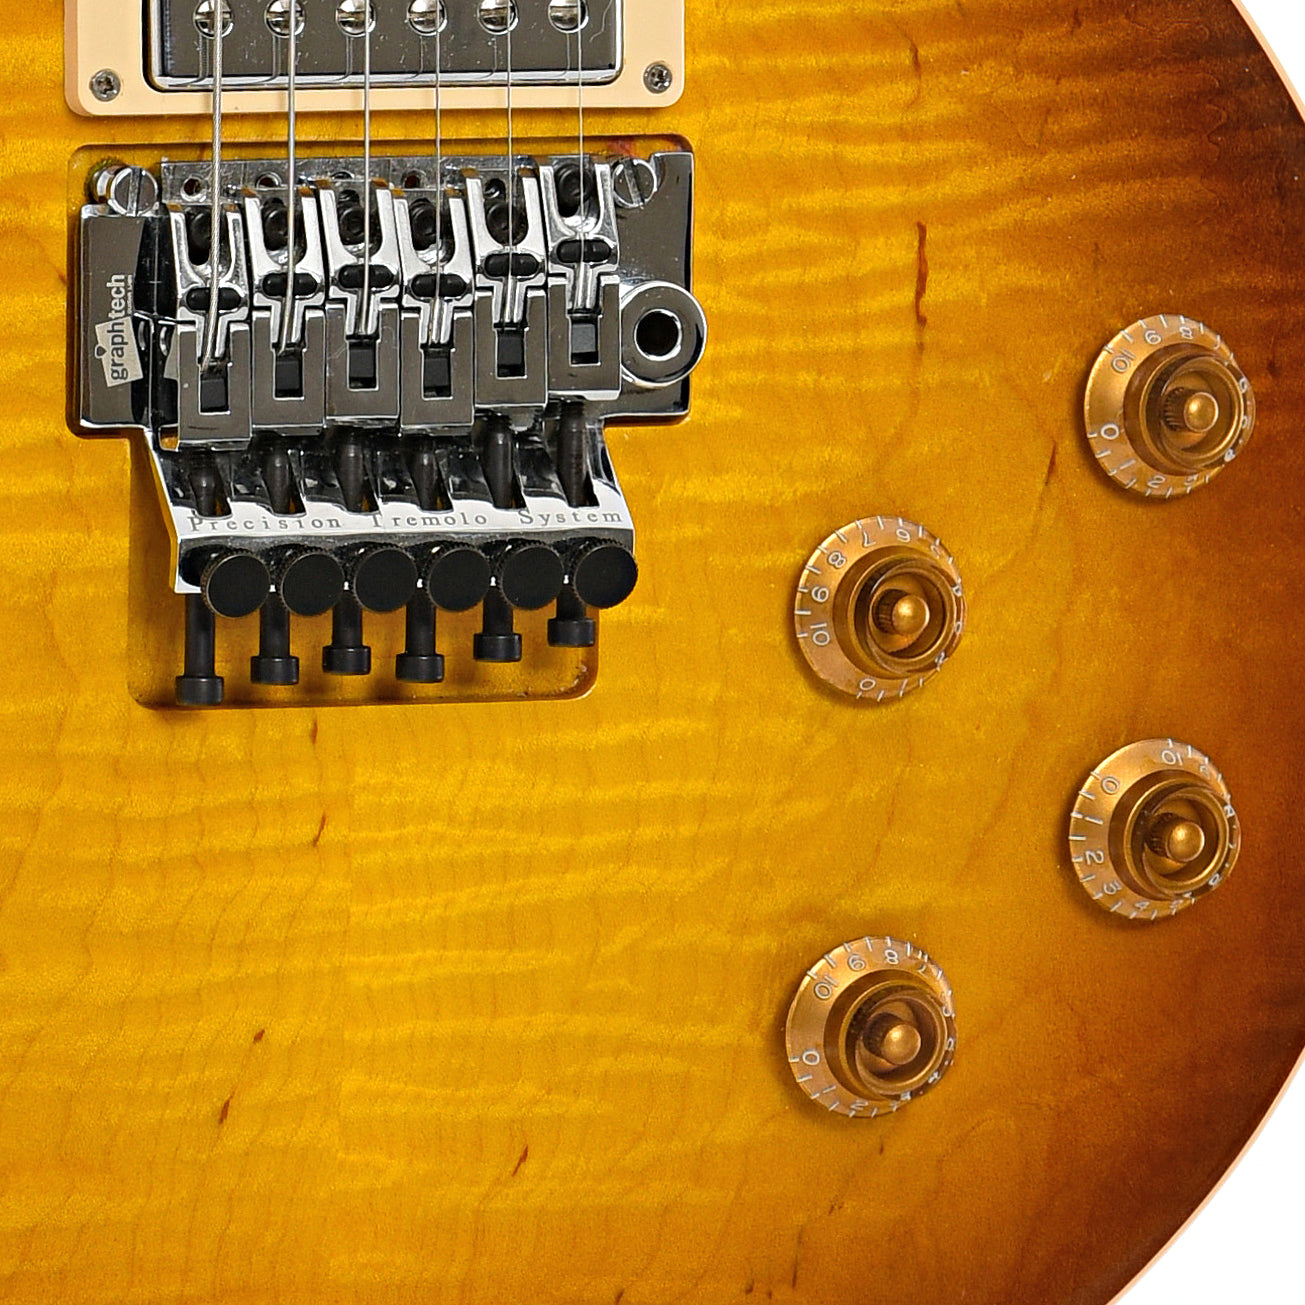 Tremolo bridge and controls of Gibson Alex Lifeson Les Paul Axcess Electric Guitar (2012)